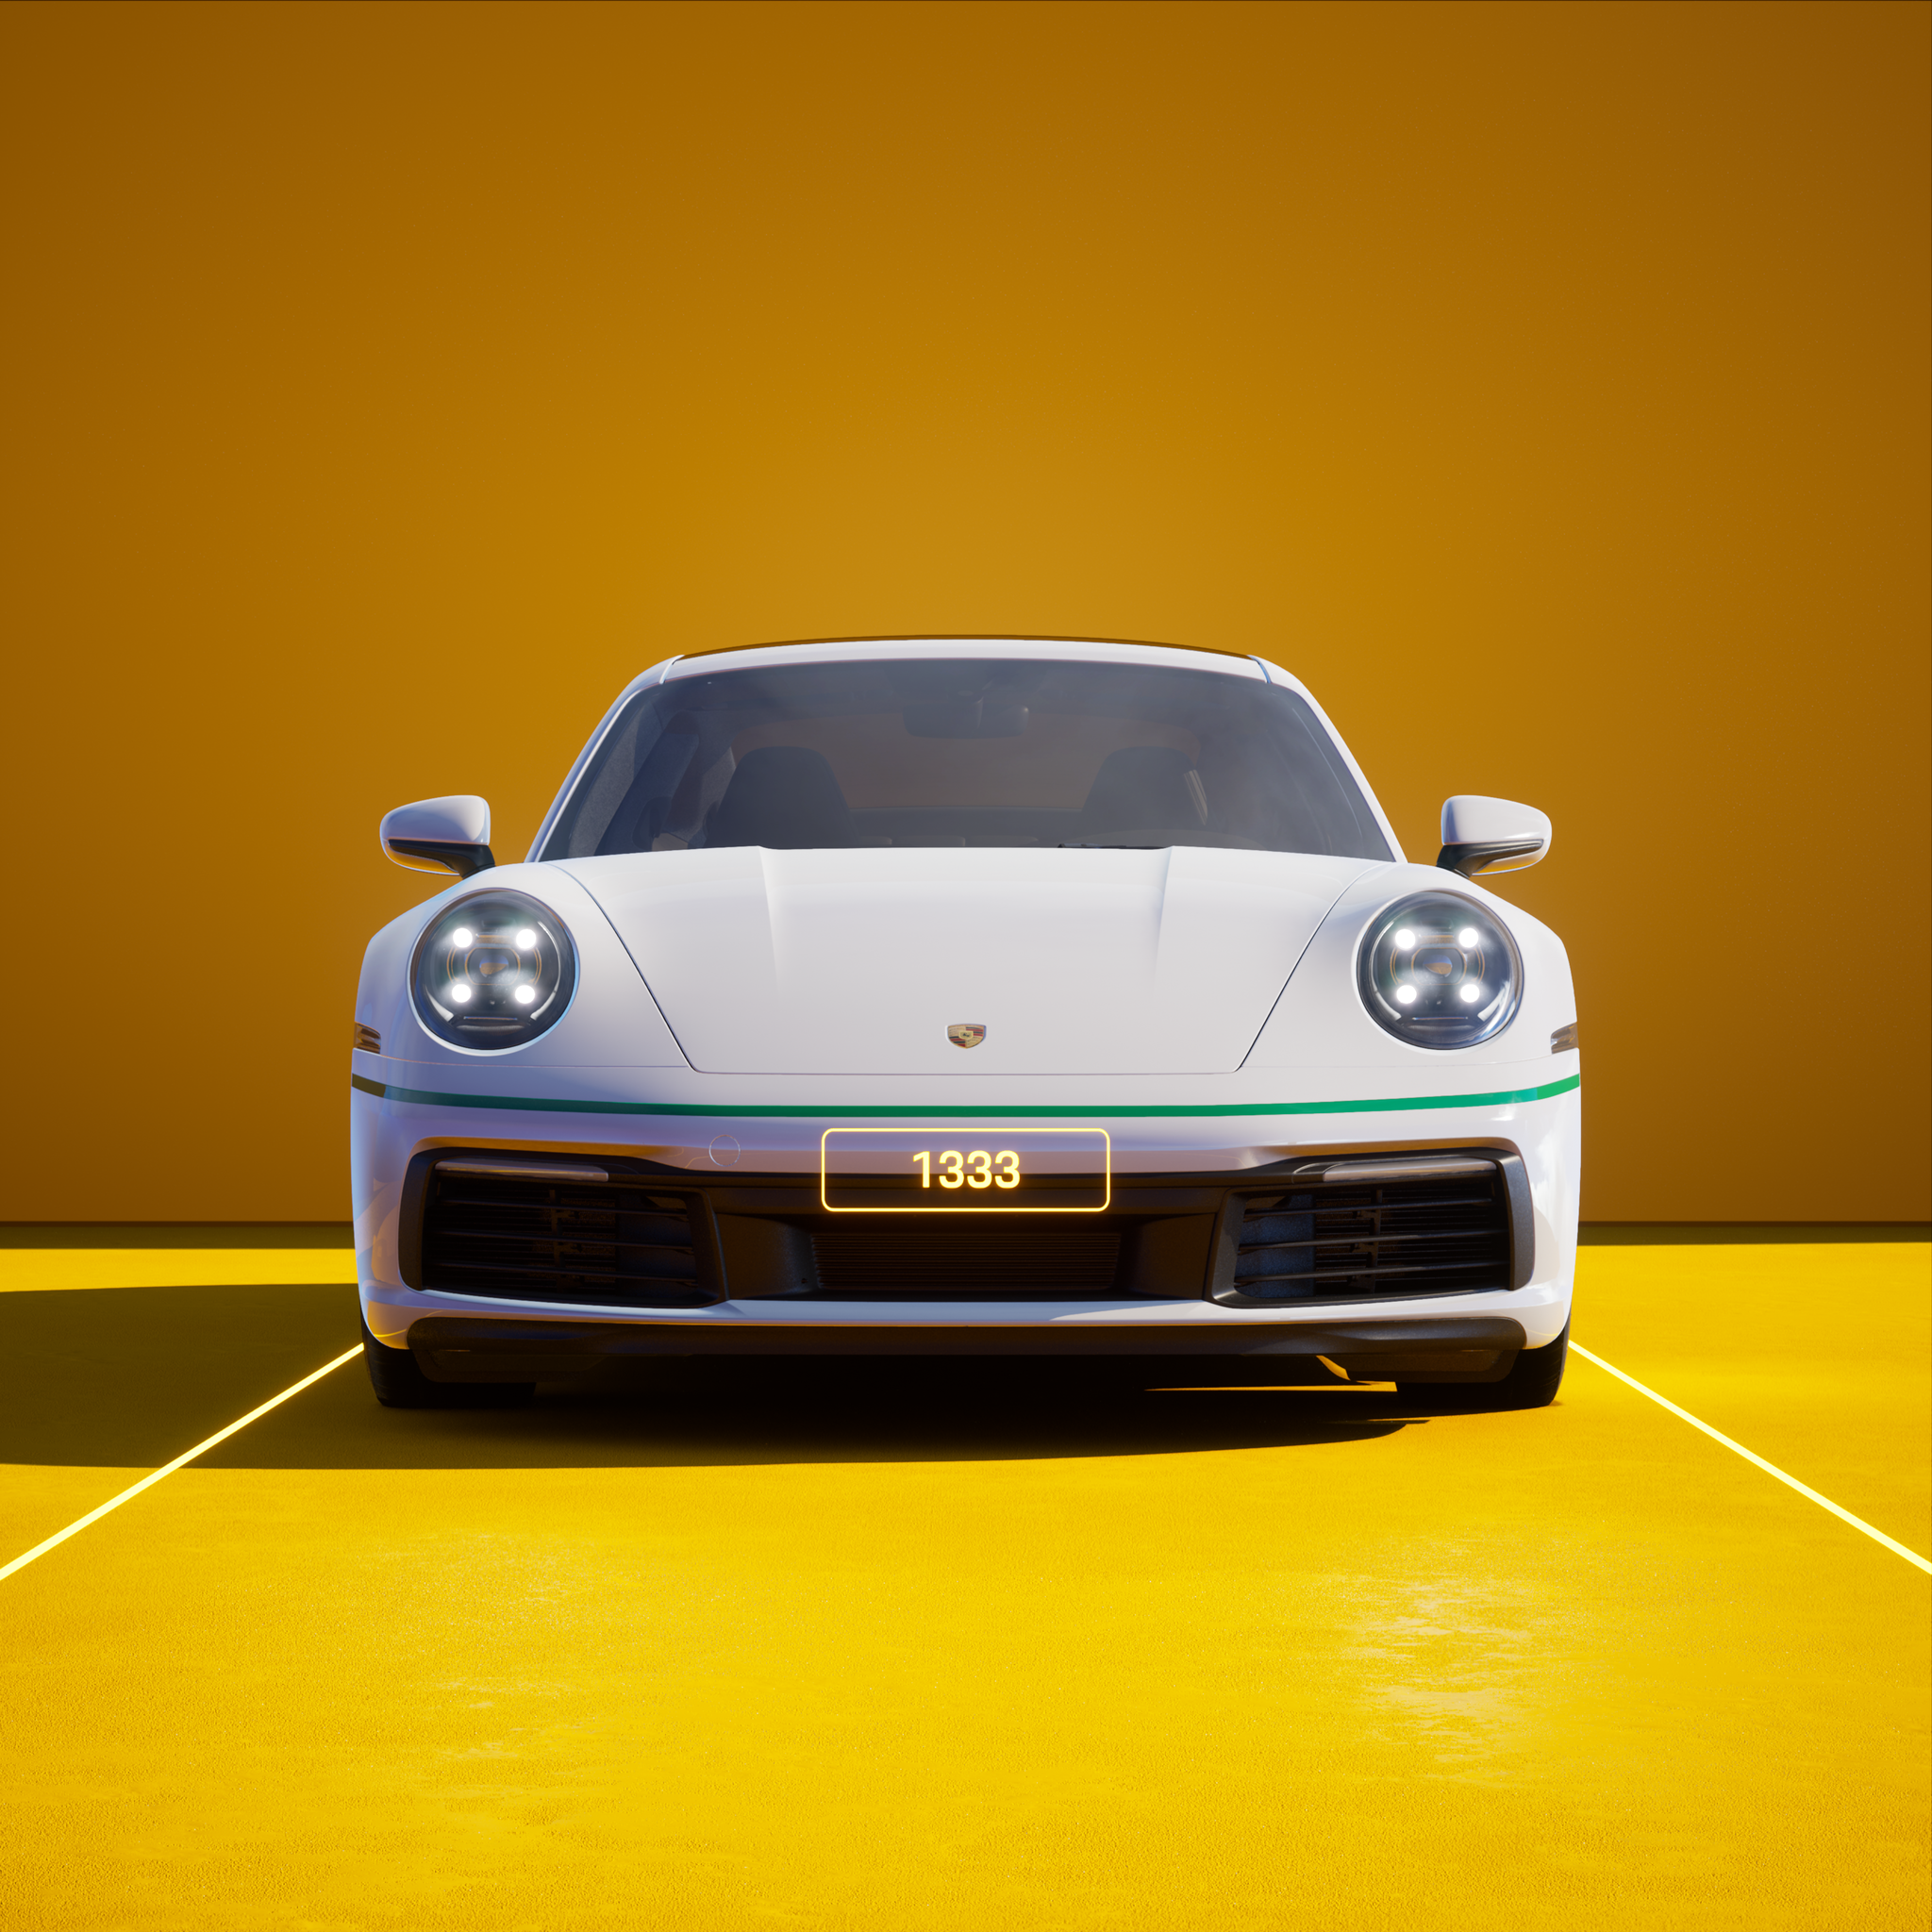 The PORSCHΞ 911 1333 image in phase